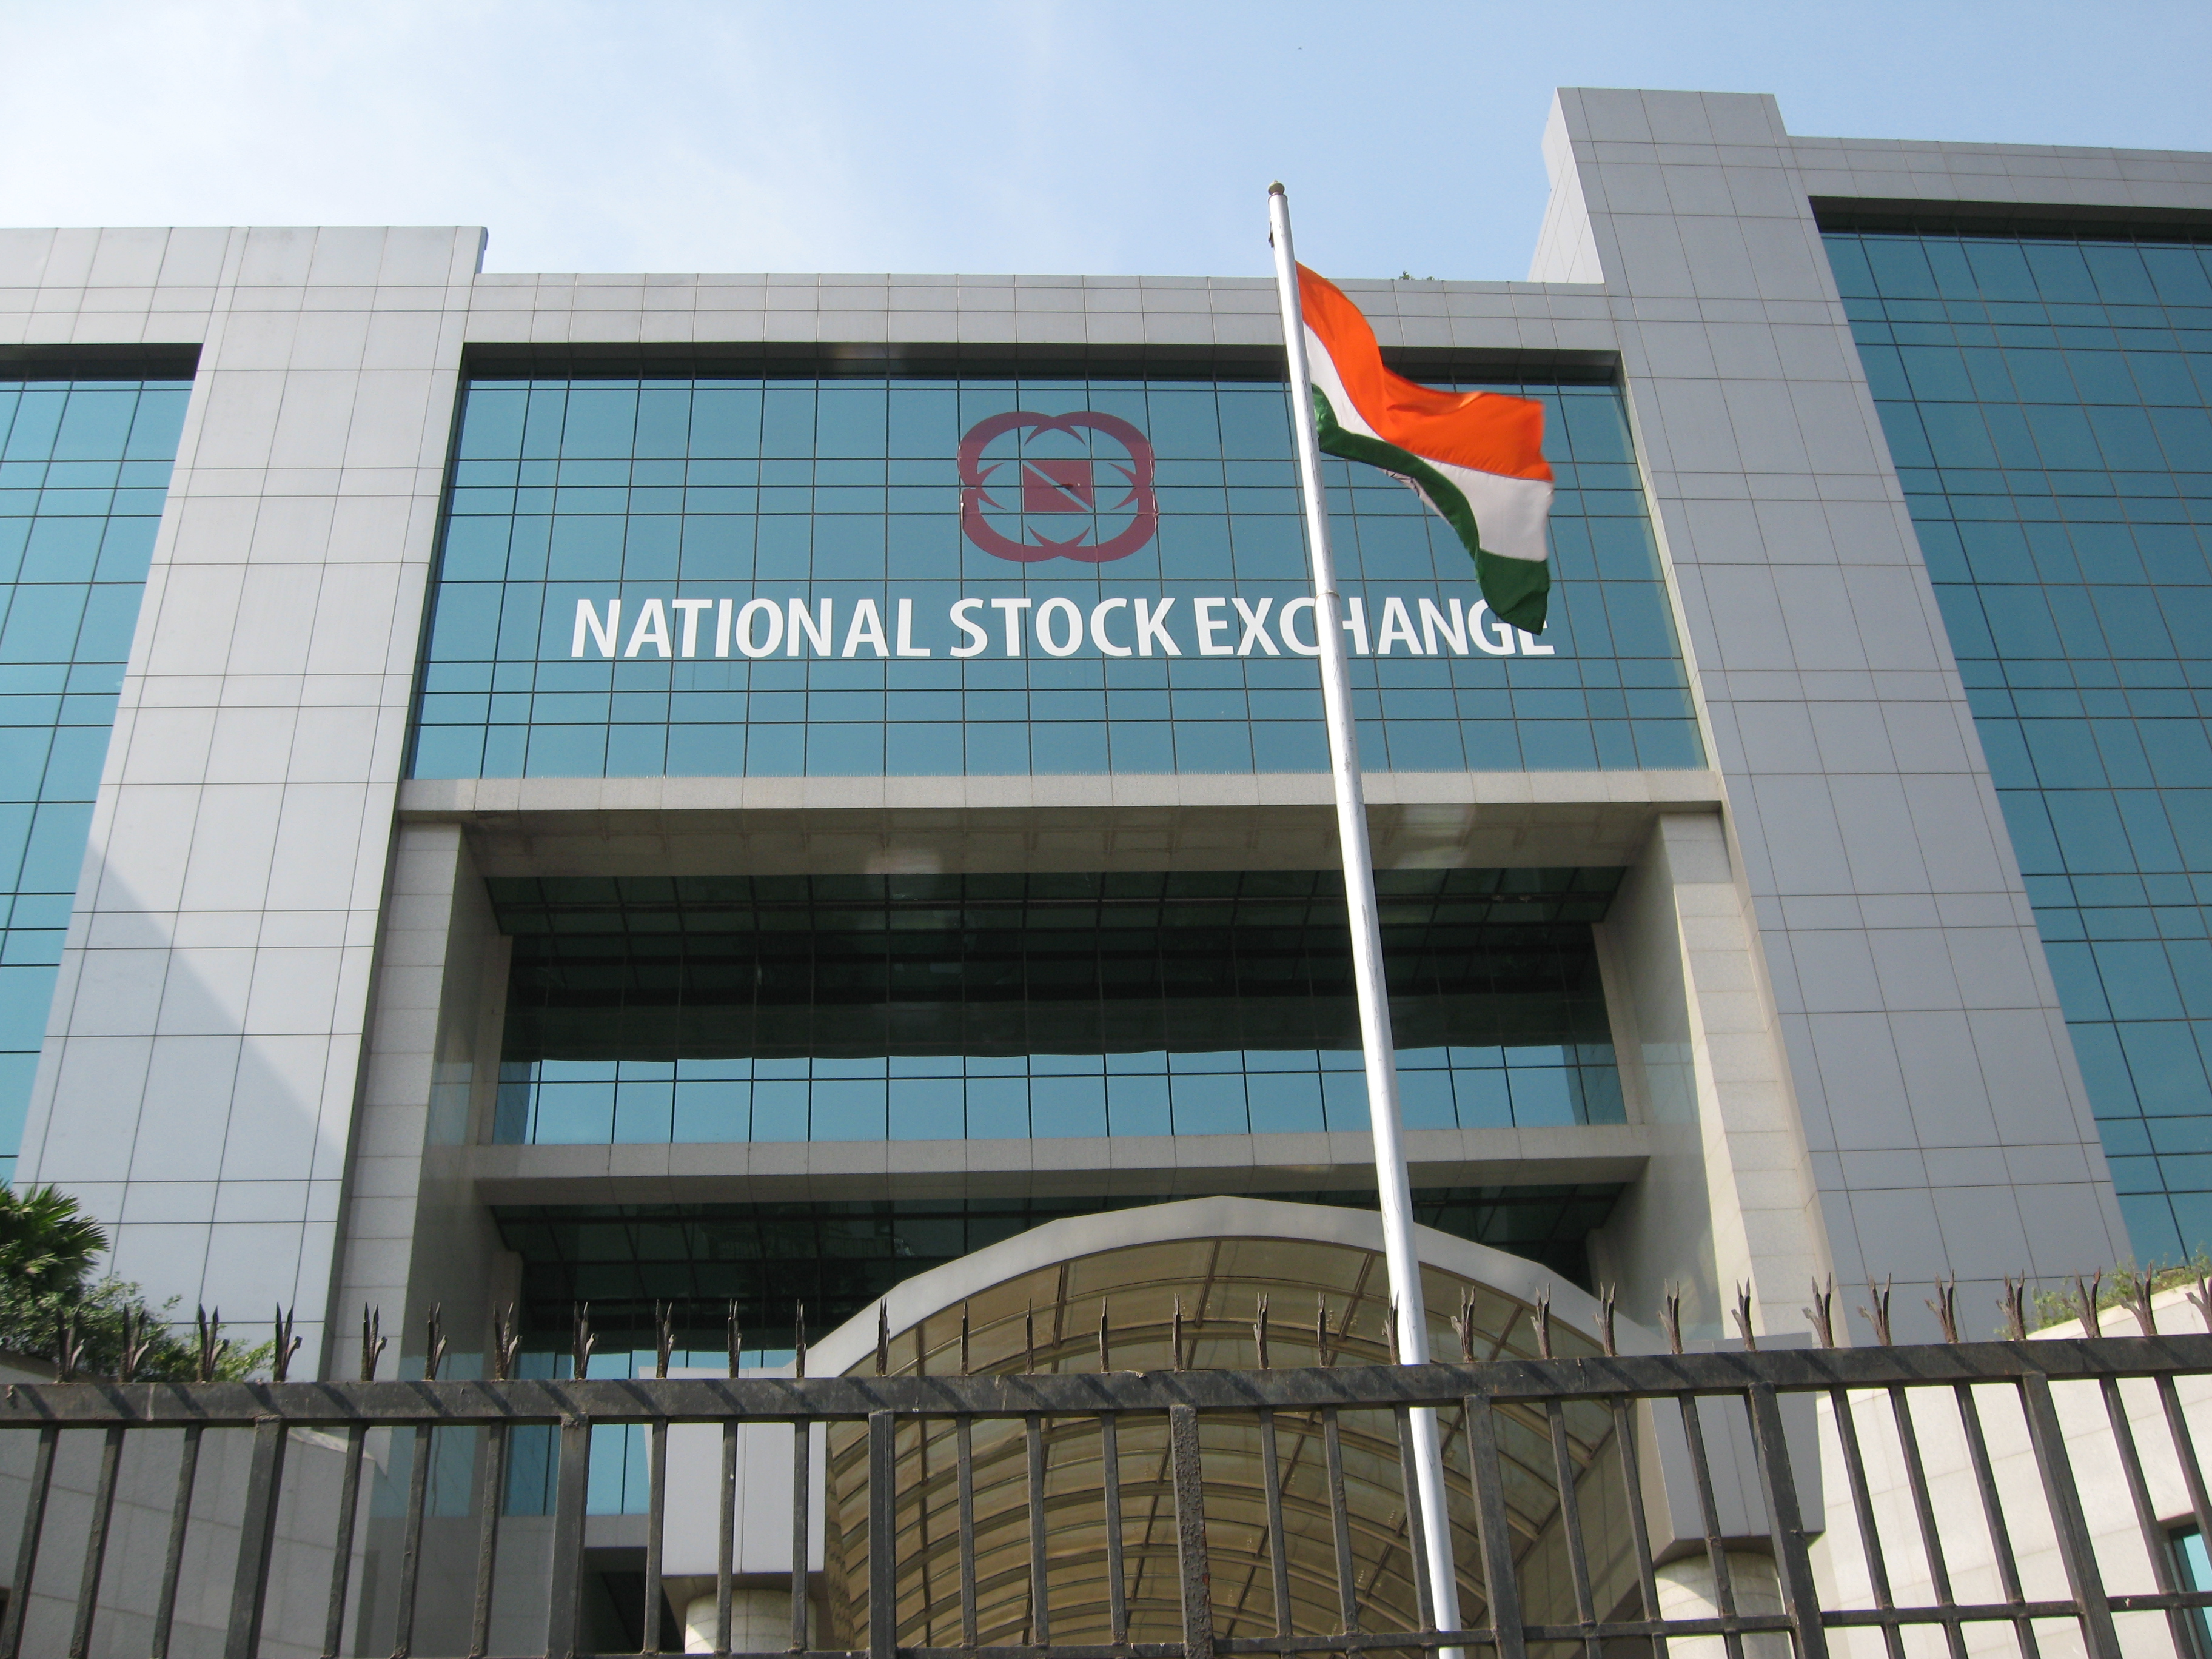 What are the basic things that you need to know about the national Stock exchange 74248 1 - What are the basic things that you need to know about the national Stock exchange?